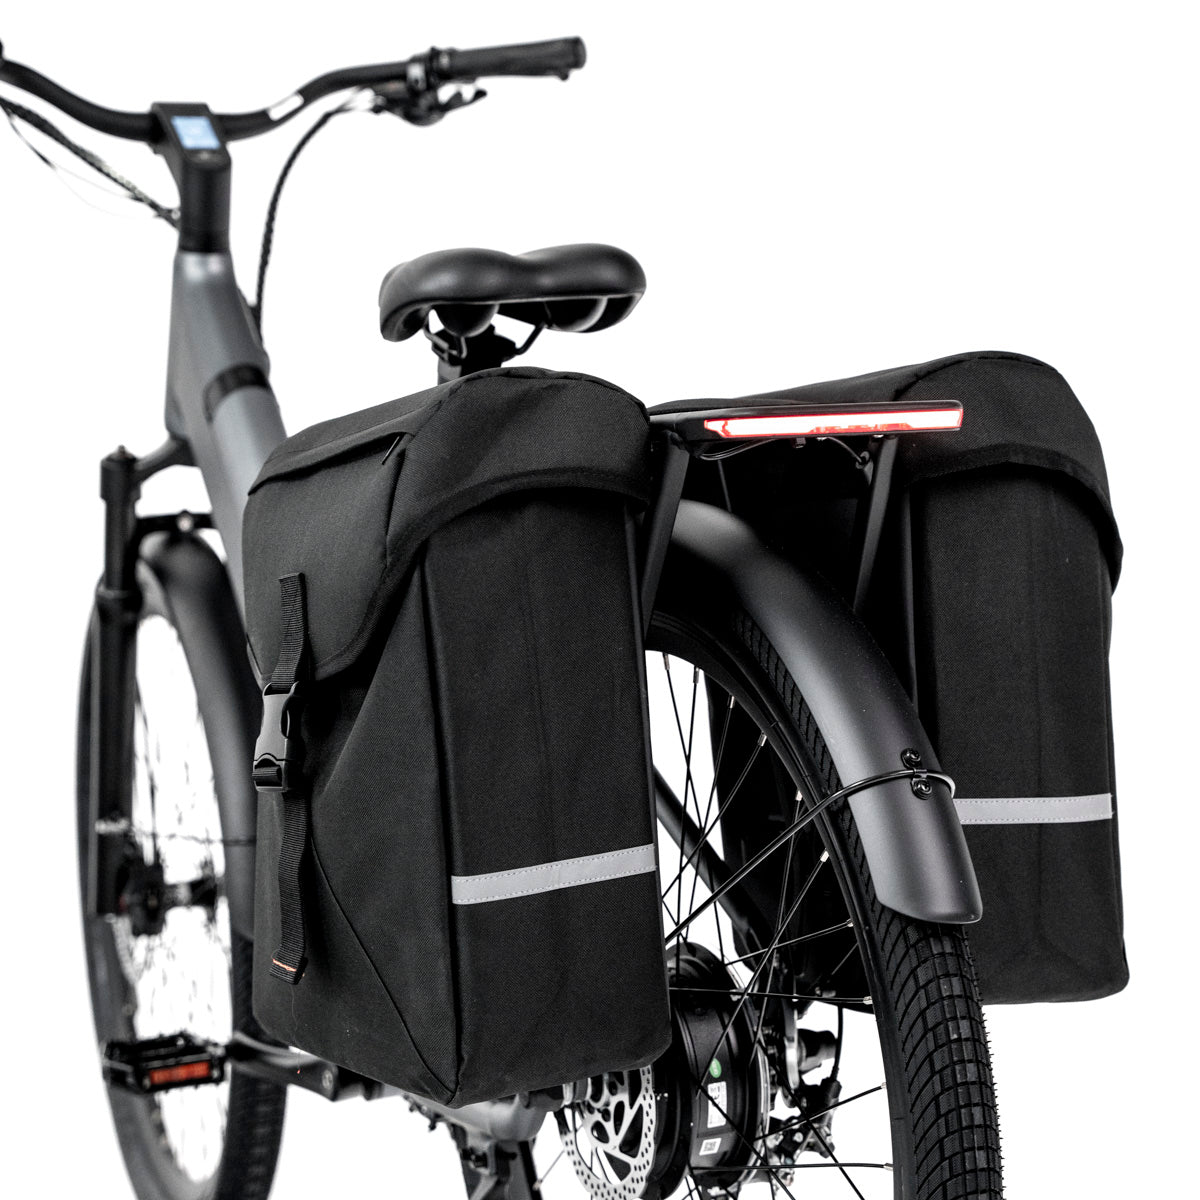 Close-up view of the dual black pannier bags and the rear light on the FavoriteBikes Hybrid CSC Ebike, showing the spacious storage options